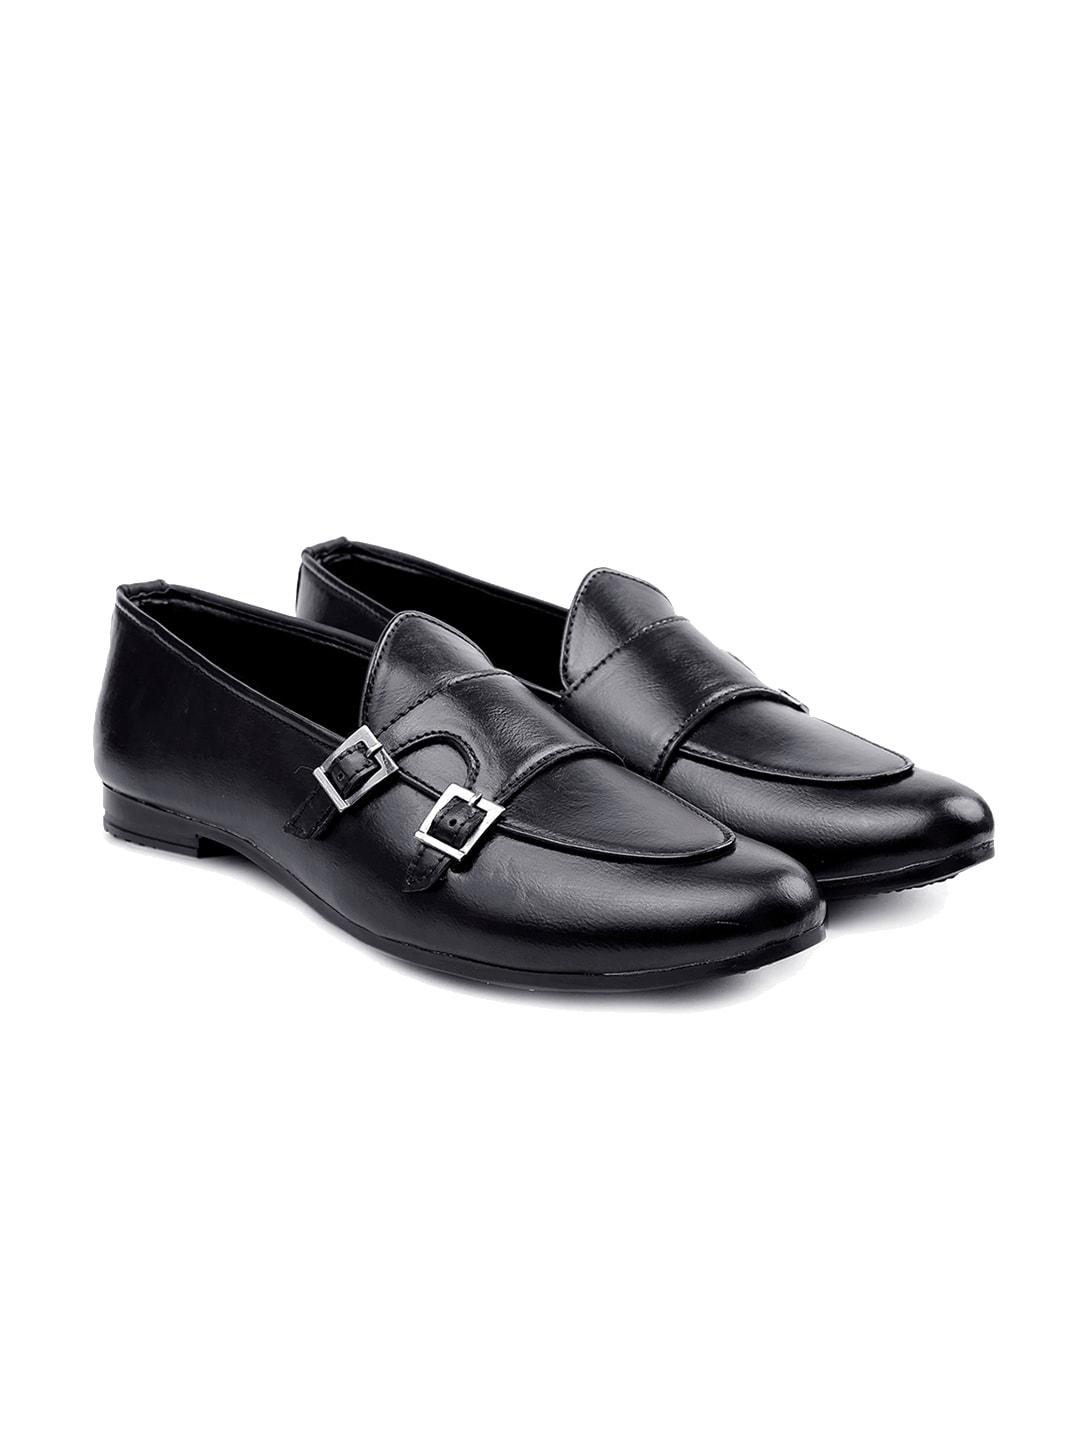 bxxy men double monk strap loafers